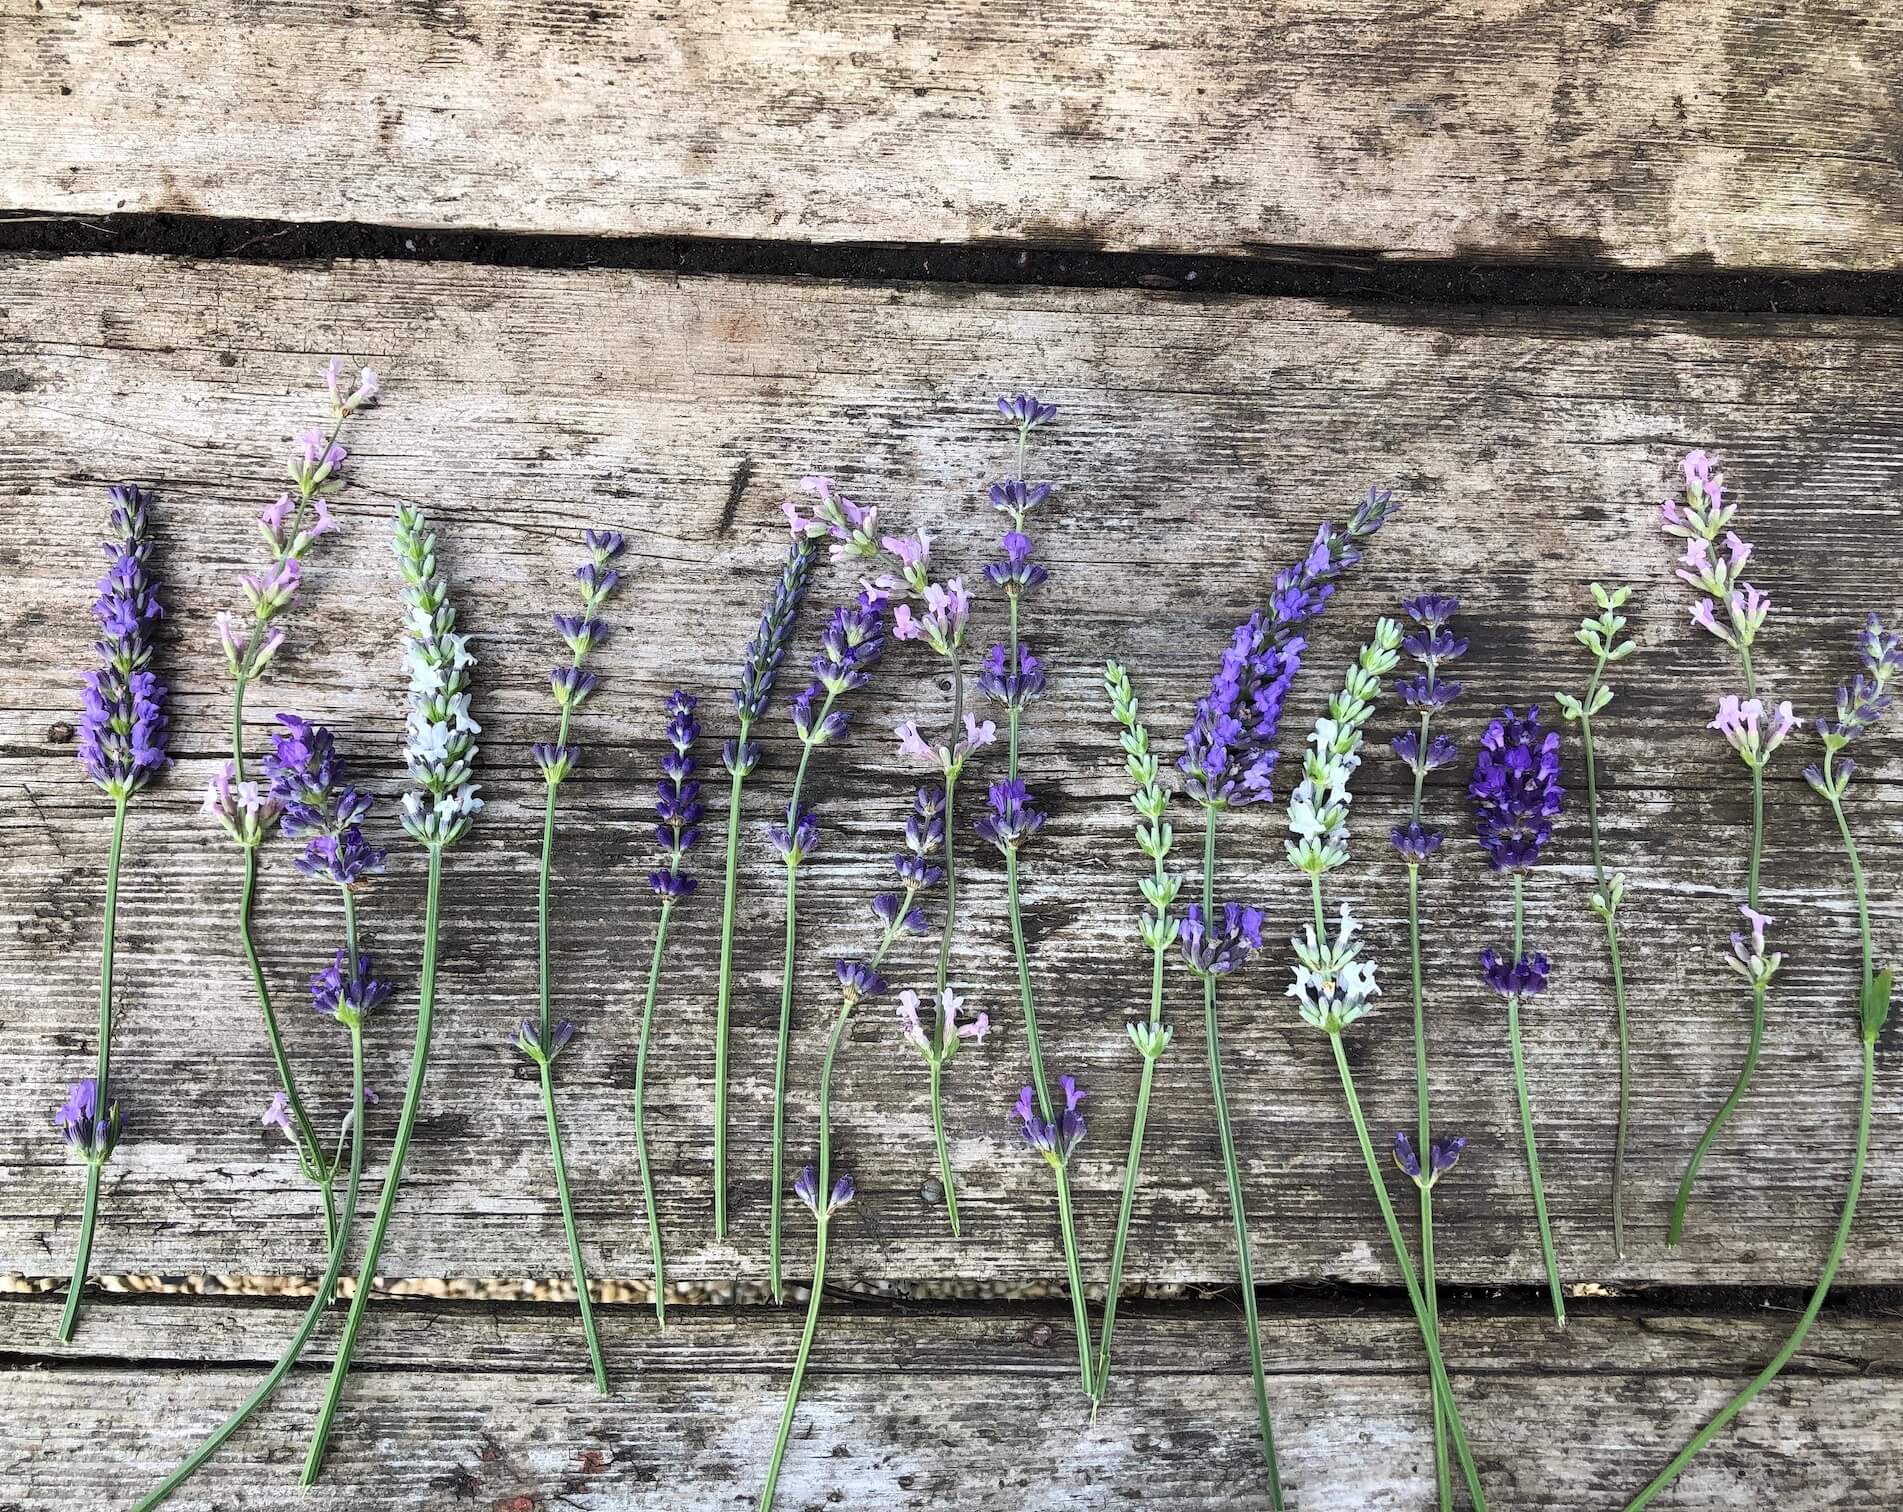 different types of Lavender cuttings on a wood table